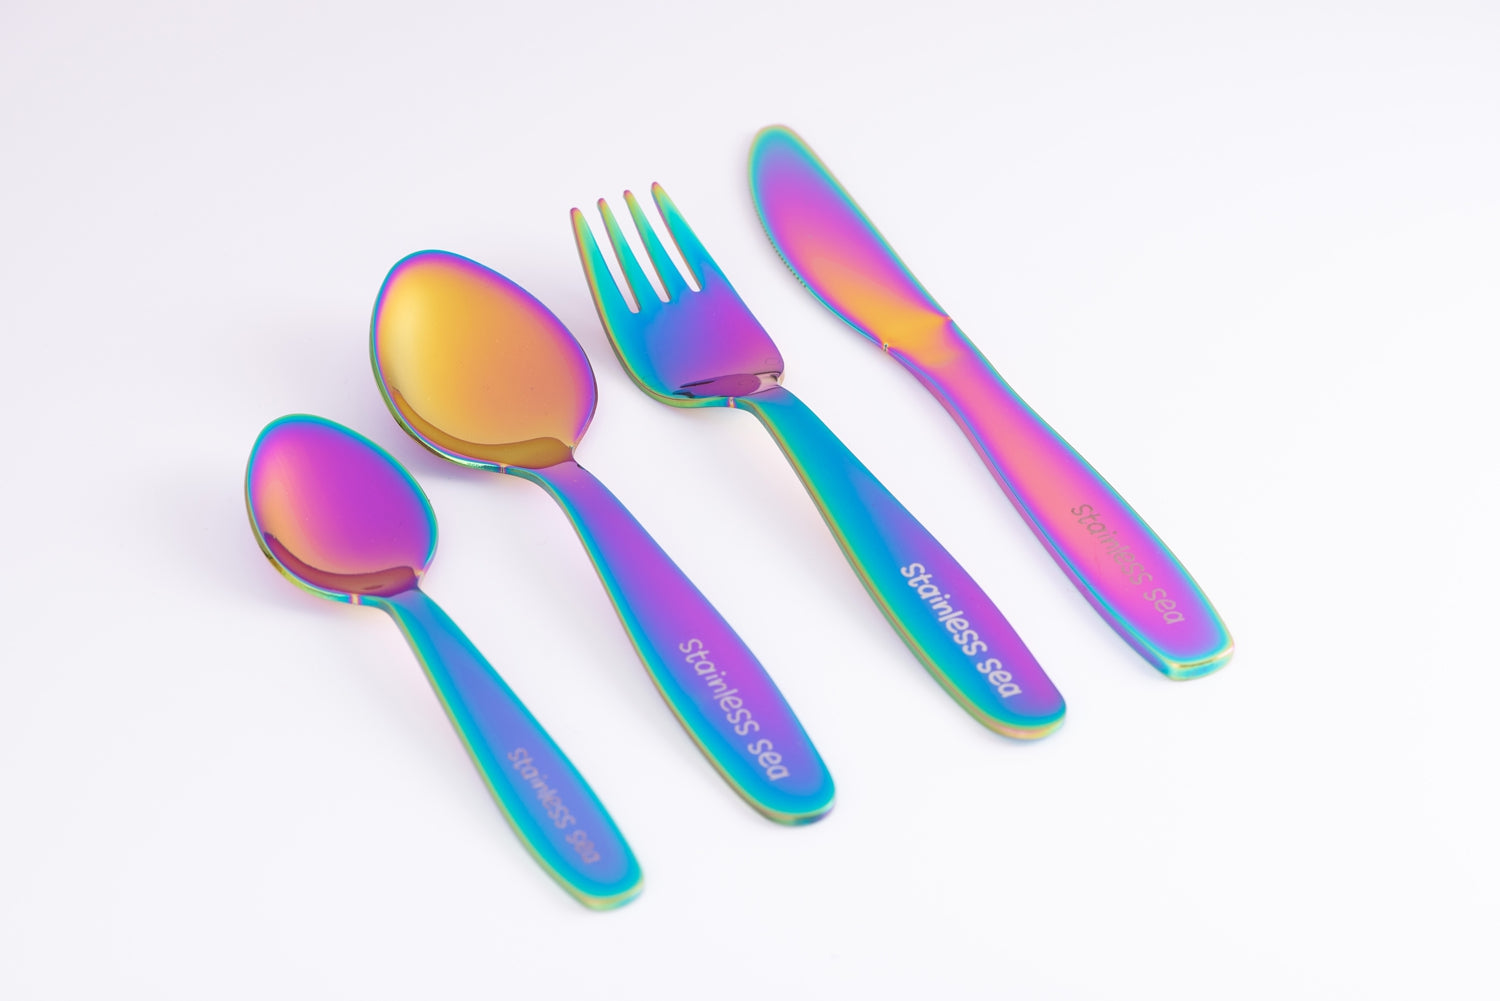 Rainbow Silverware for Kids, Travel Silverware With Carrying Case,  Childrens Custom Spoon and Fork, Sparkly Place Setting, Fun Novelty Gift 